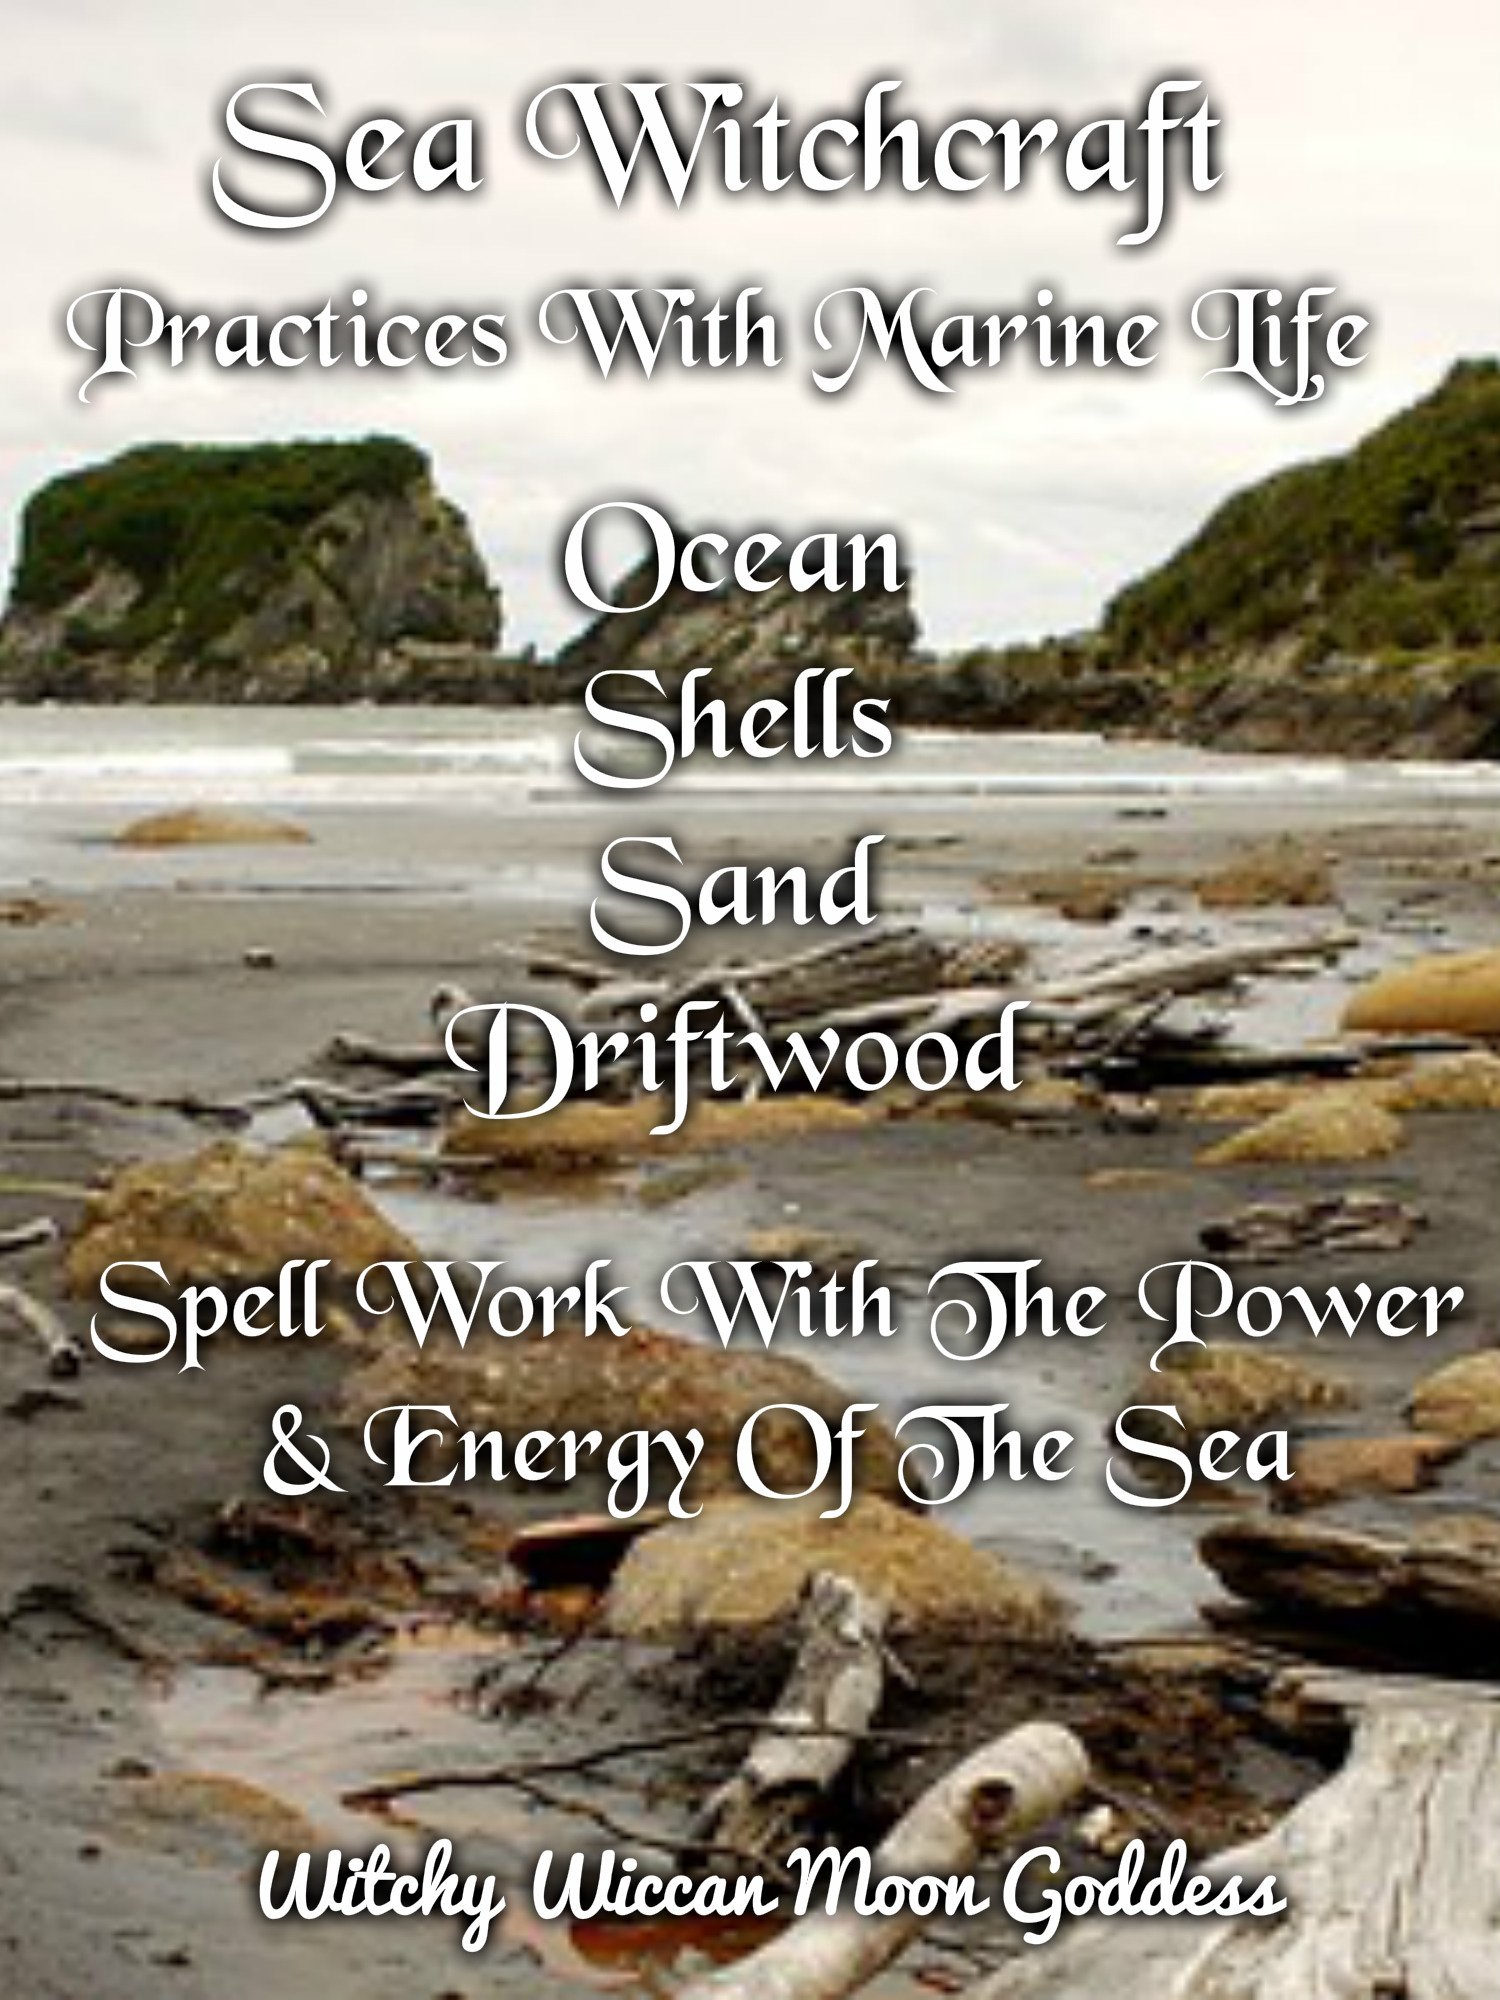 Sea Witchcraft: Practices with Marine life, Ocean, Shells, Sand, Driftwood. Spell work with the power & energy of the sea.